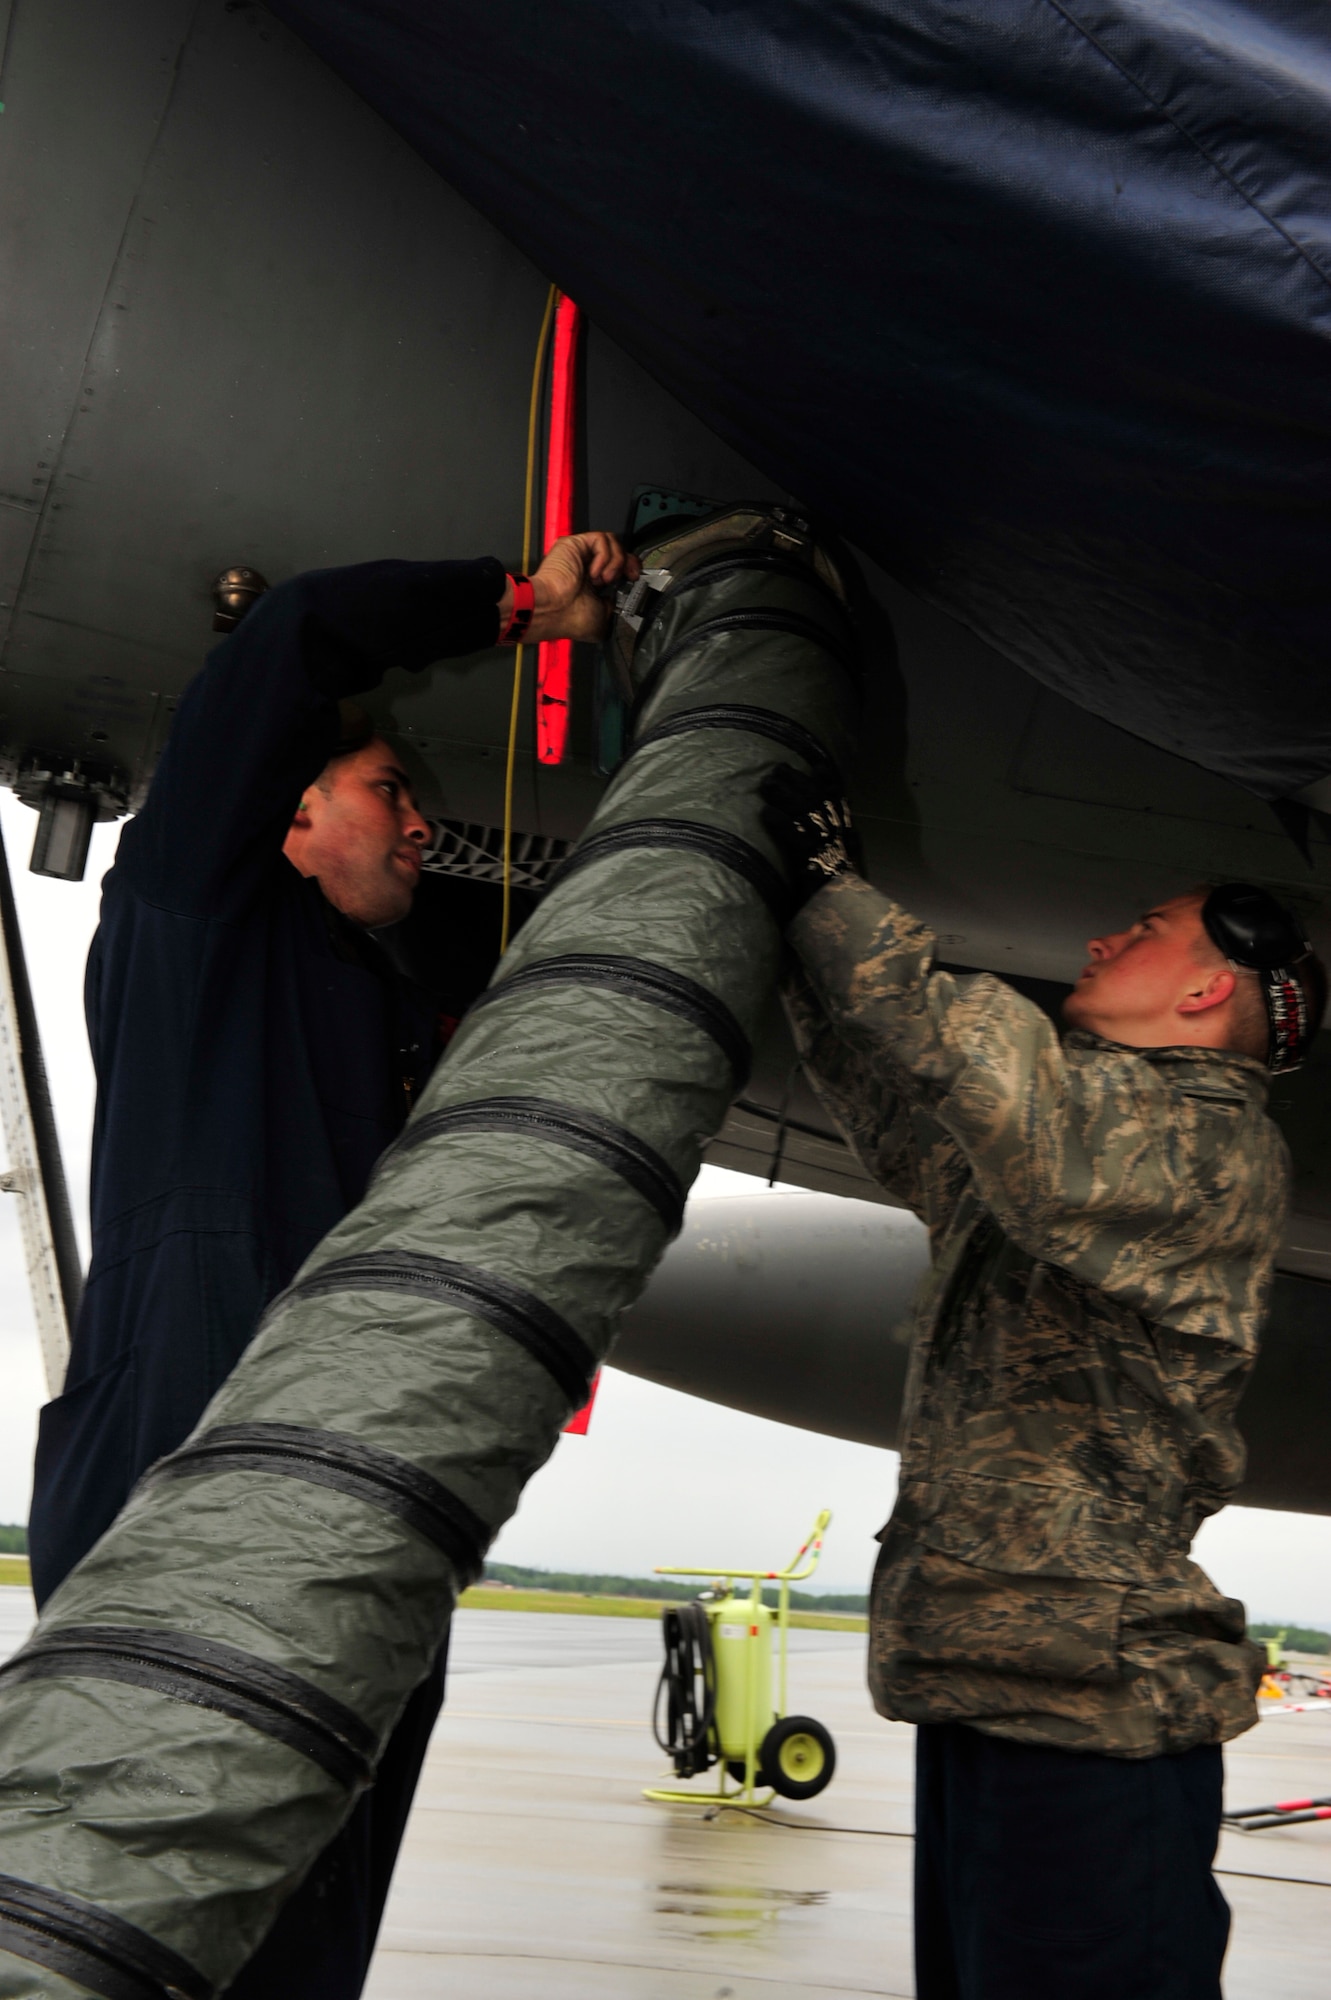 (From right to left) U.S. Air Force Senior Airman Joshua Brown, an electrical/environmental technician  and Airman 1st Class Cody Weller, a crew chief, both with the 18th Aircraft Maintenance Squadron, Kadena Air Base, Japan, tighten an air hose to an adaptor unit on an F-15 Eagle during the Northern Edge Premier Joint Training Exercise at Eielson Air Force Base, Alaska, June 20.  Northern Edge is Alaska?s largest military training exercise. (U.S. Air Force photo/ Staff Sgt. Lakisha A. Croley)